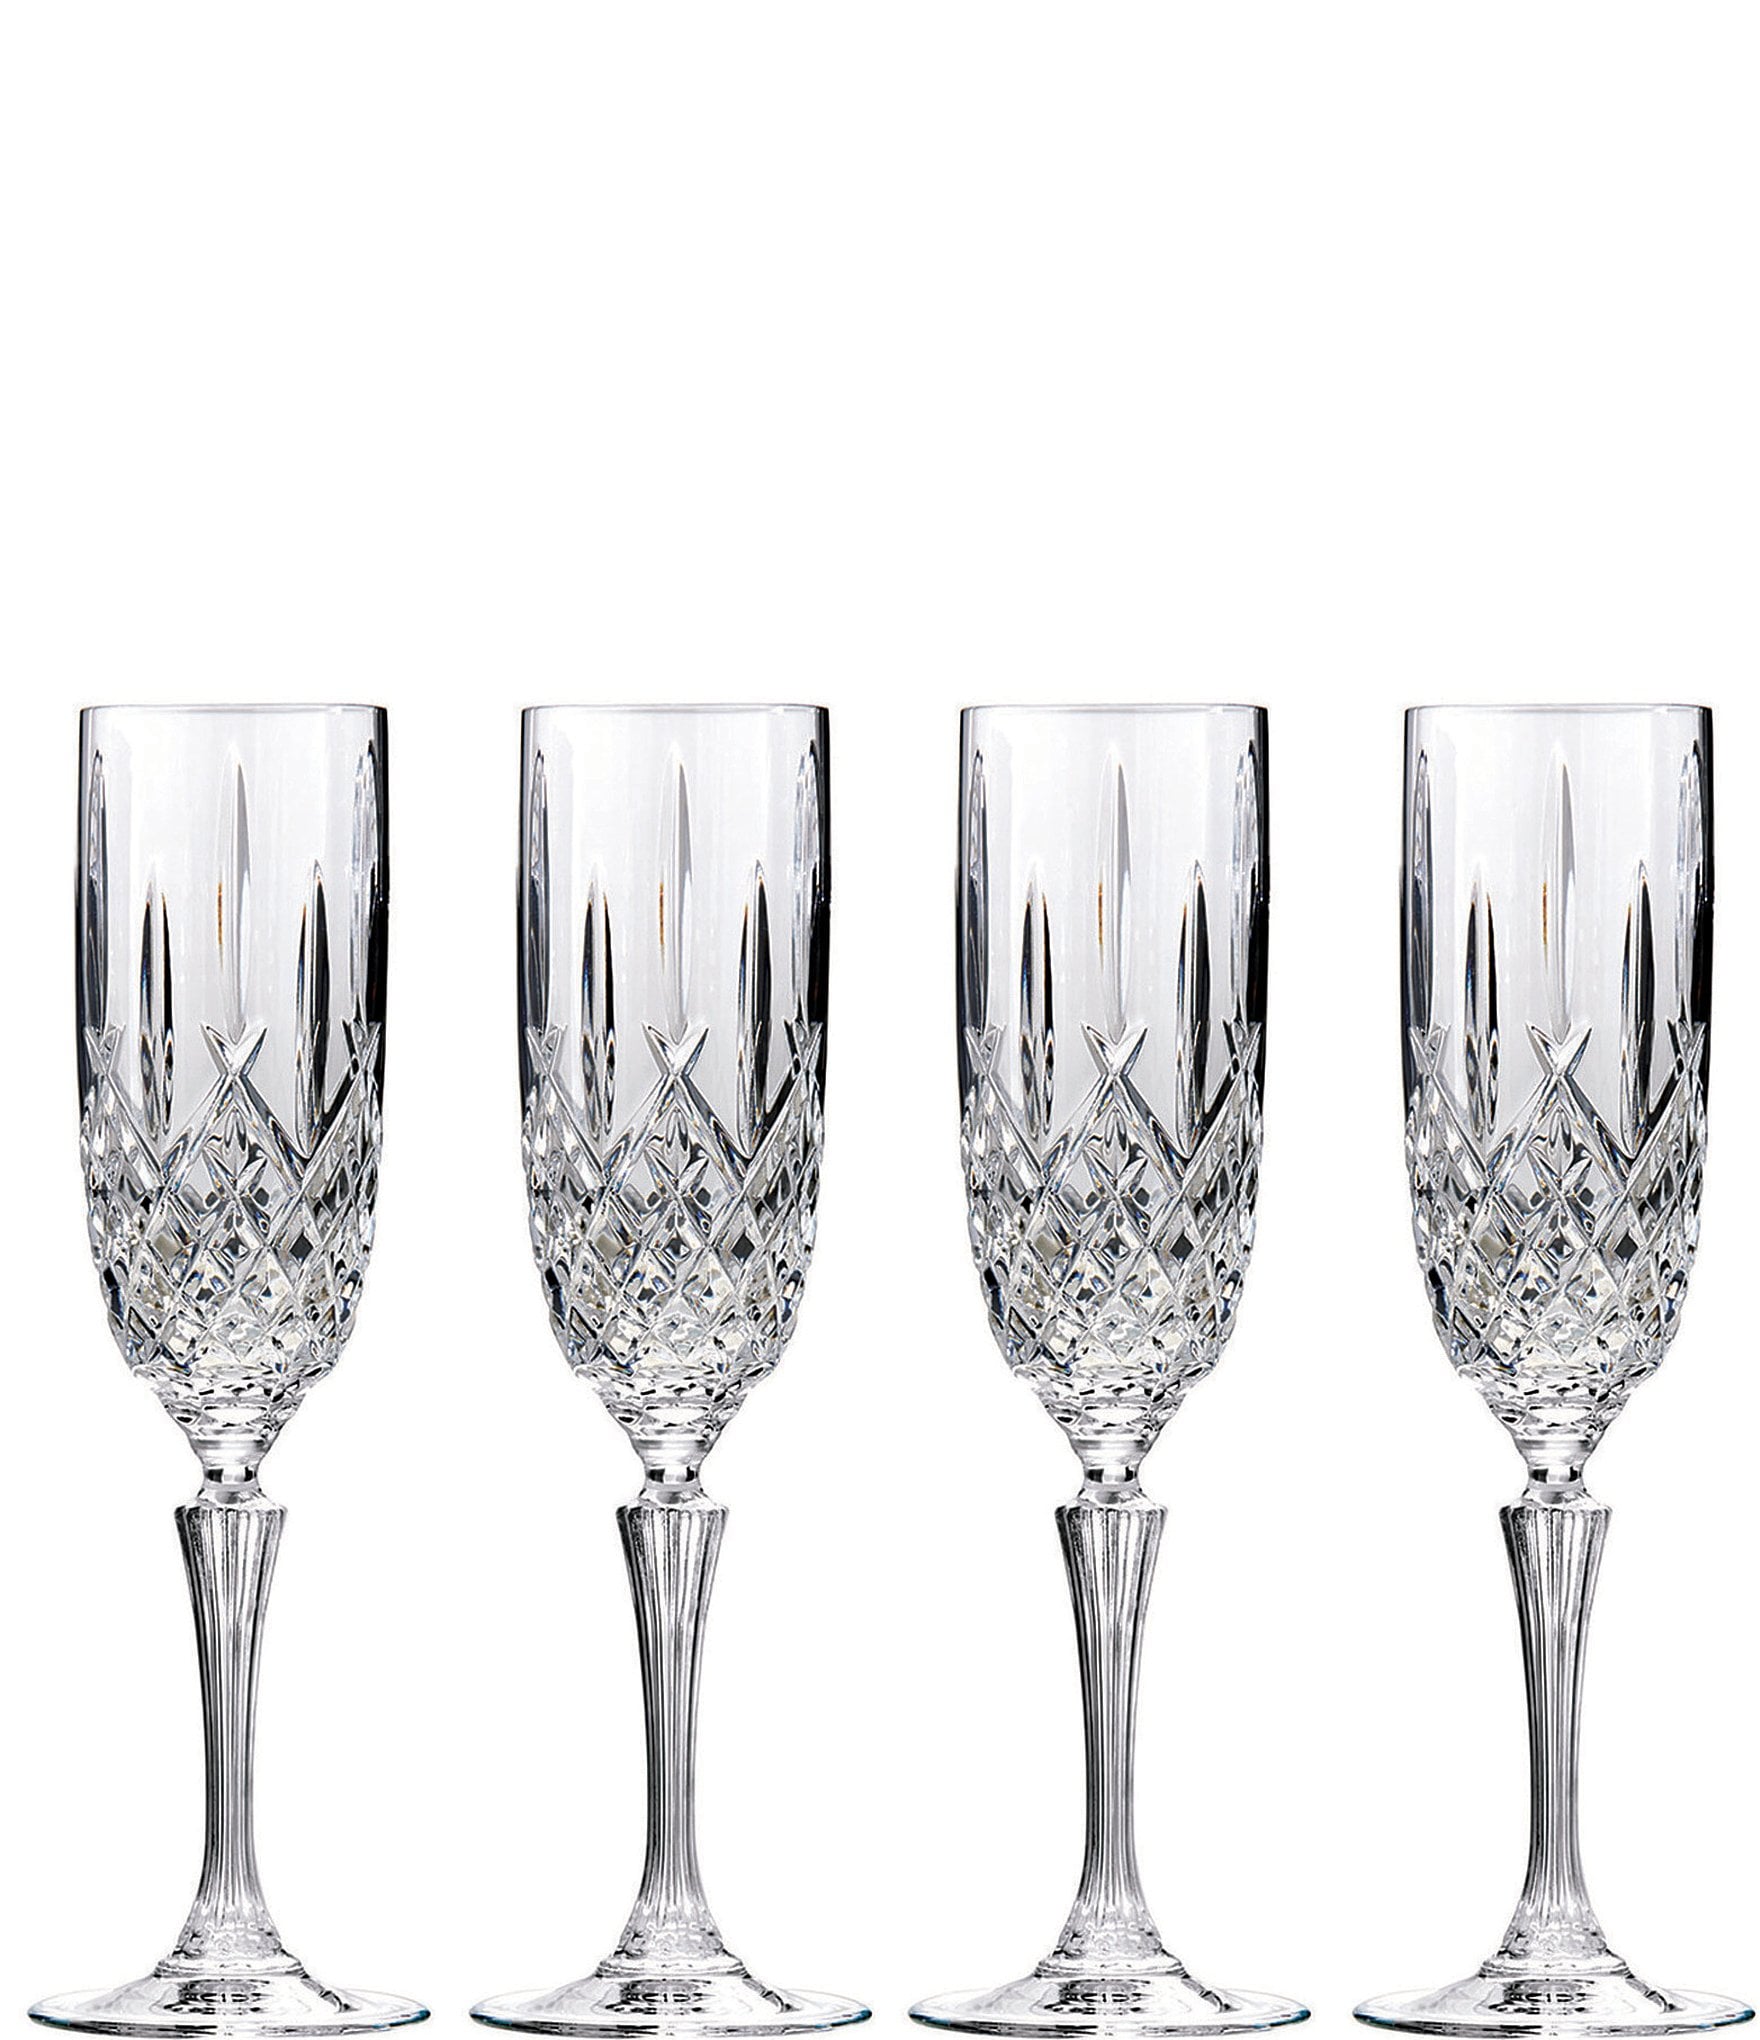 https://dimg.dillards.com/is/image/DillardsZoom/zoom/marquis-by-waterford-markham-traditional-crystal-flutes-set-of-4/00000000_zi_6c8bf8b3-4a8a-4b11-b94d-8e36530db1ec.jpg